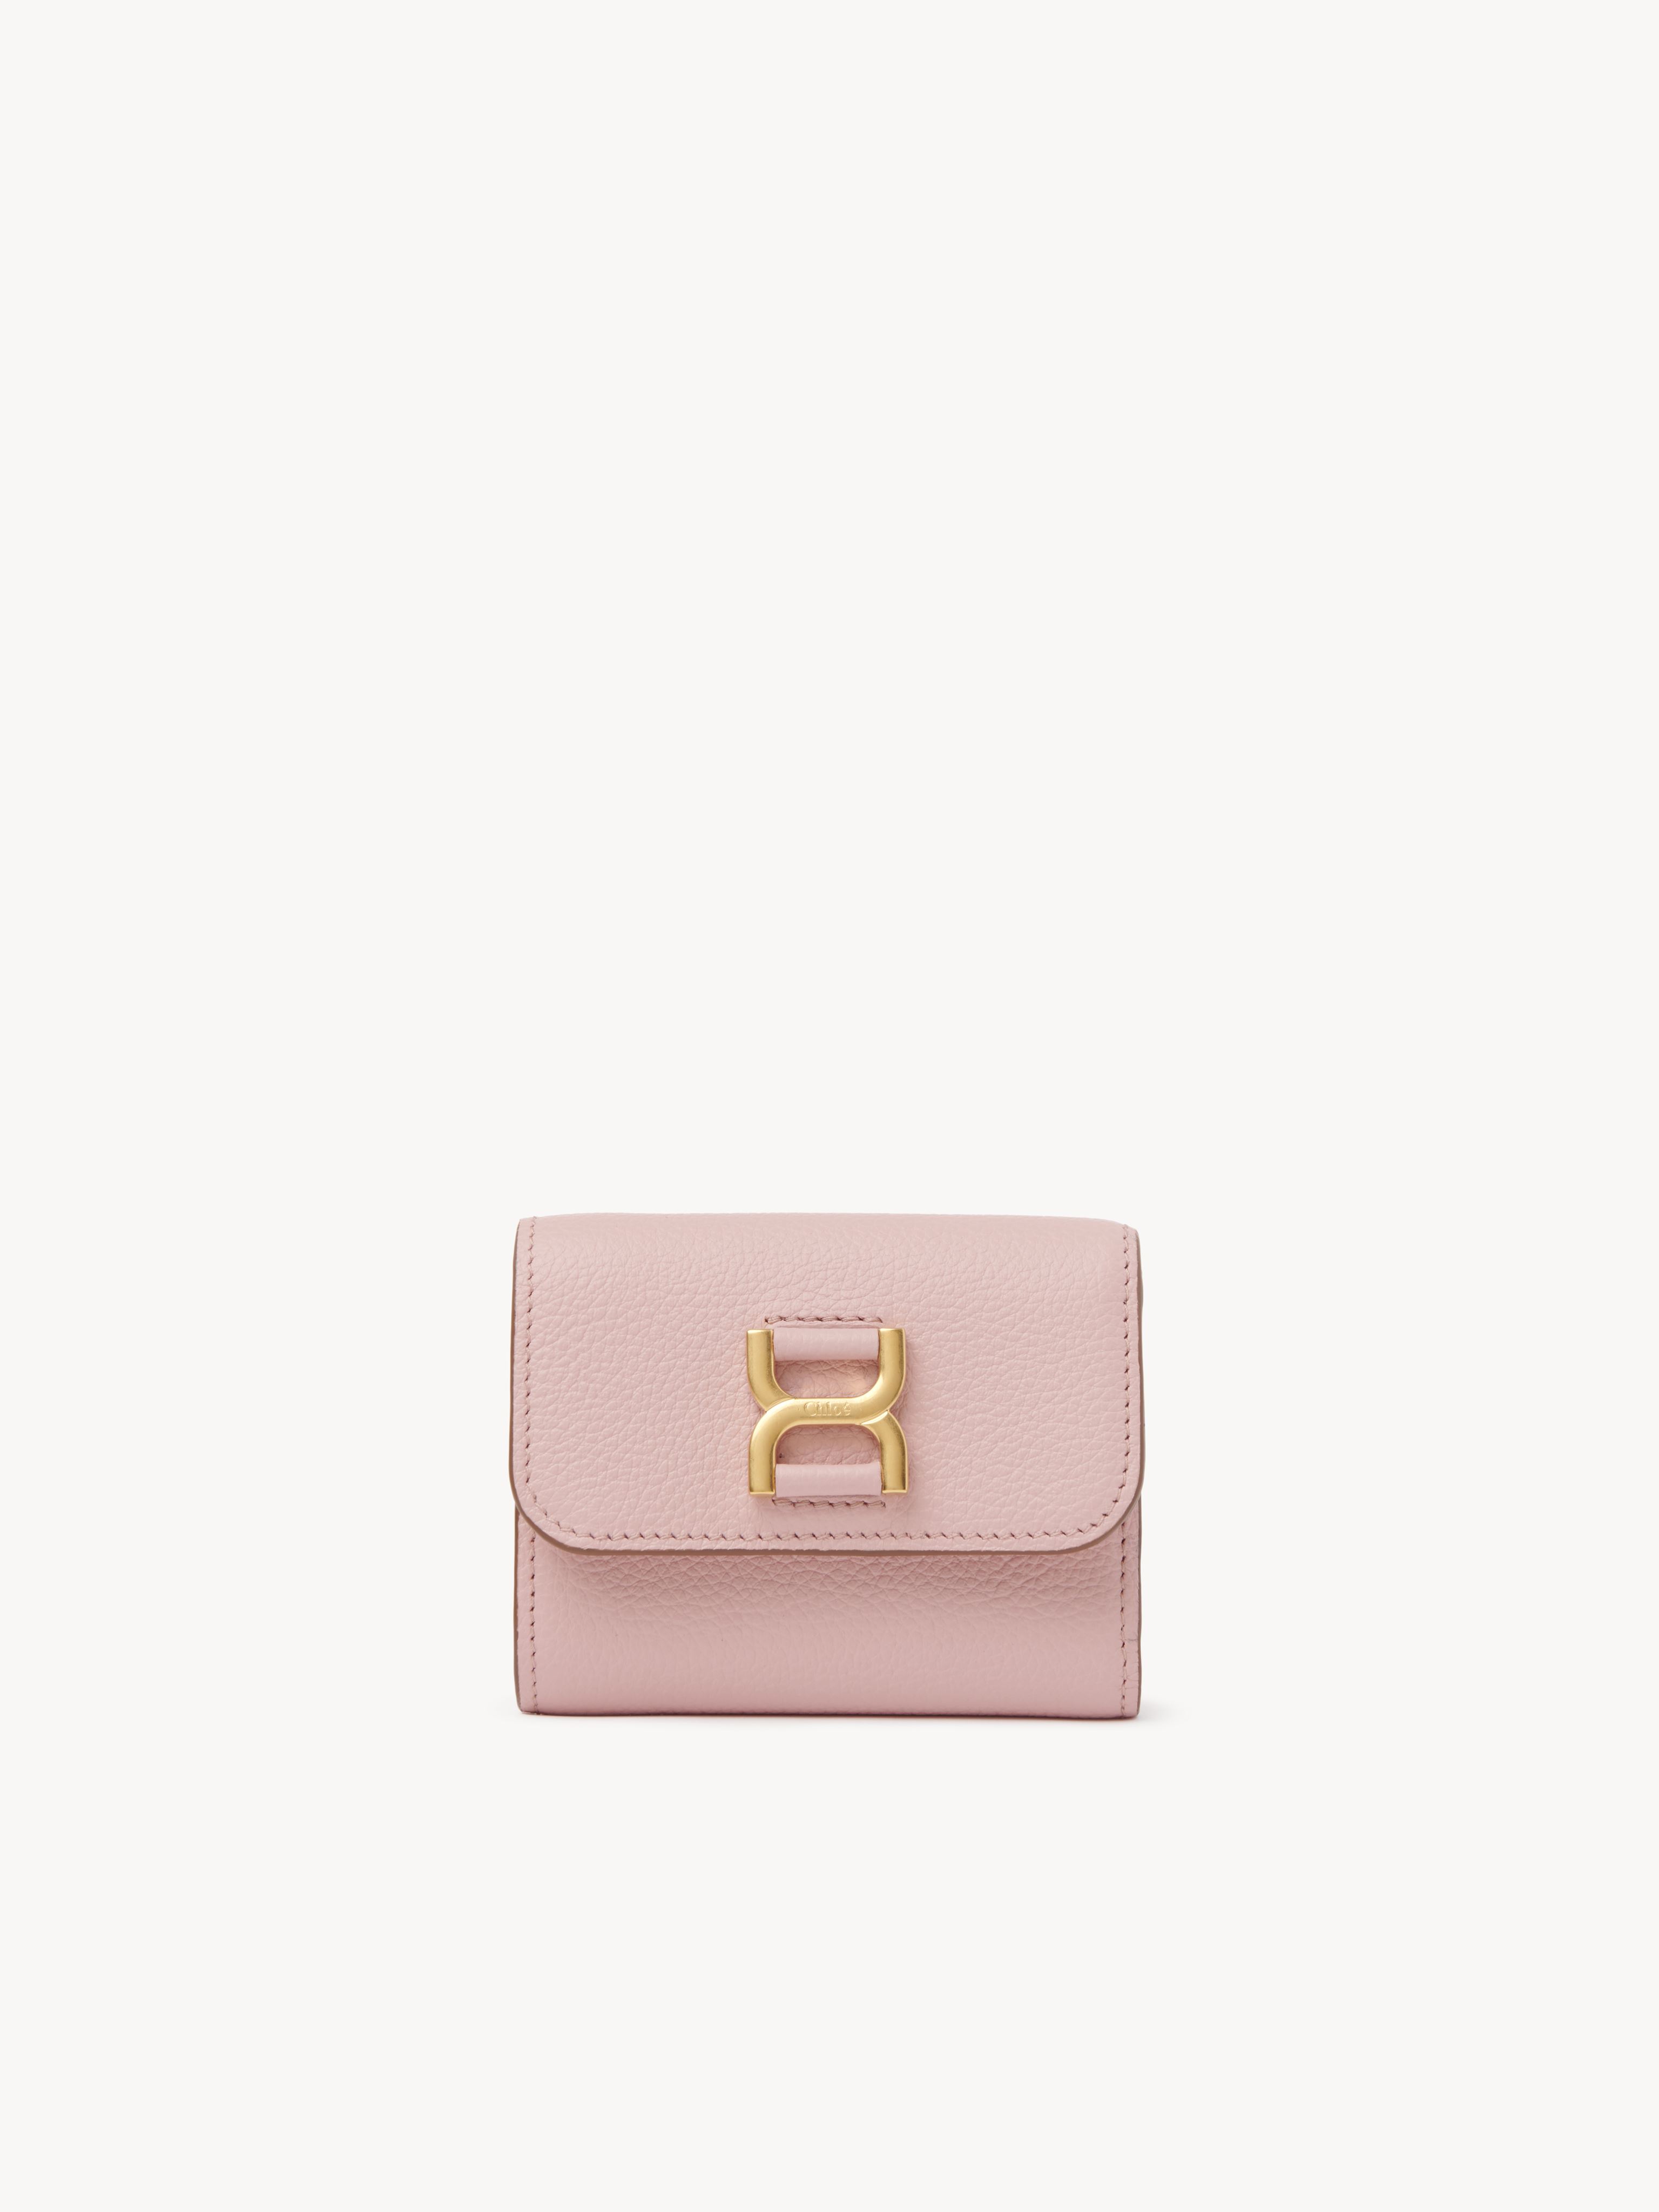 Chloé Marcie Small Tri-fold Pink Size Onesize 100% Calf-skin Leather